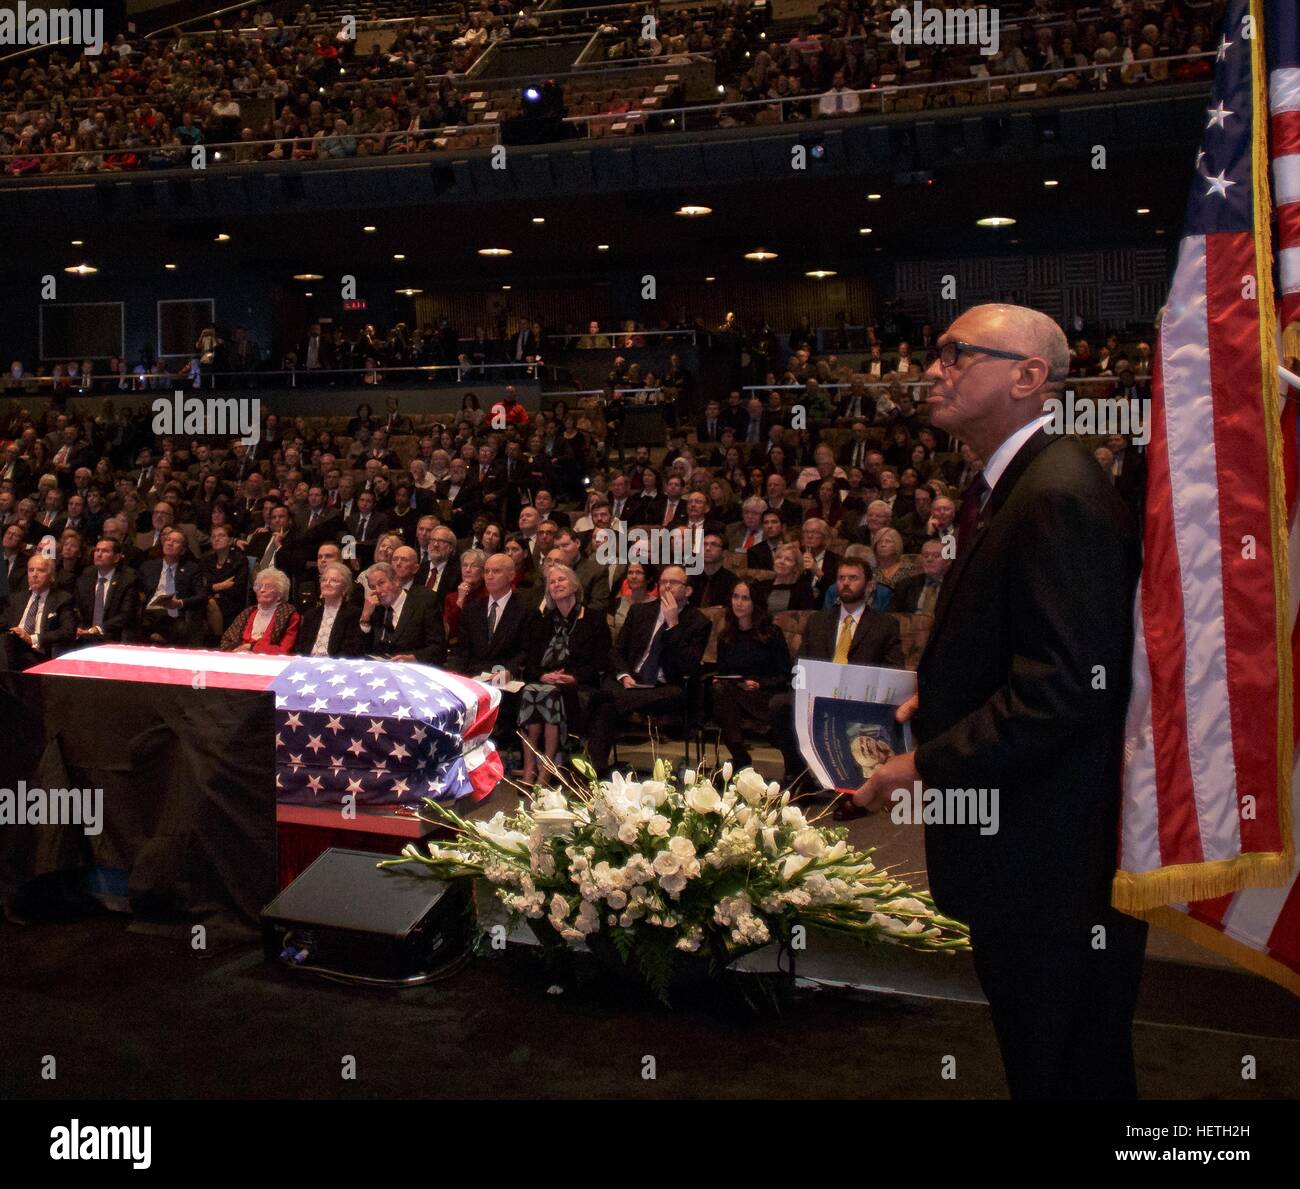 NASA Administrator Charles Bolden stands off-stage watching a video as he prepares to give a speech during the memorial service celebrating the life of former NASA astronaut and U.S. Senator John Glenn at the Ohio State University Mershon Auditorium December 17, 2016 in Columbus, Ohio. Stock Photo